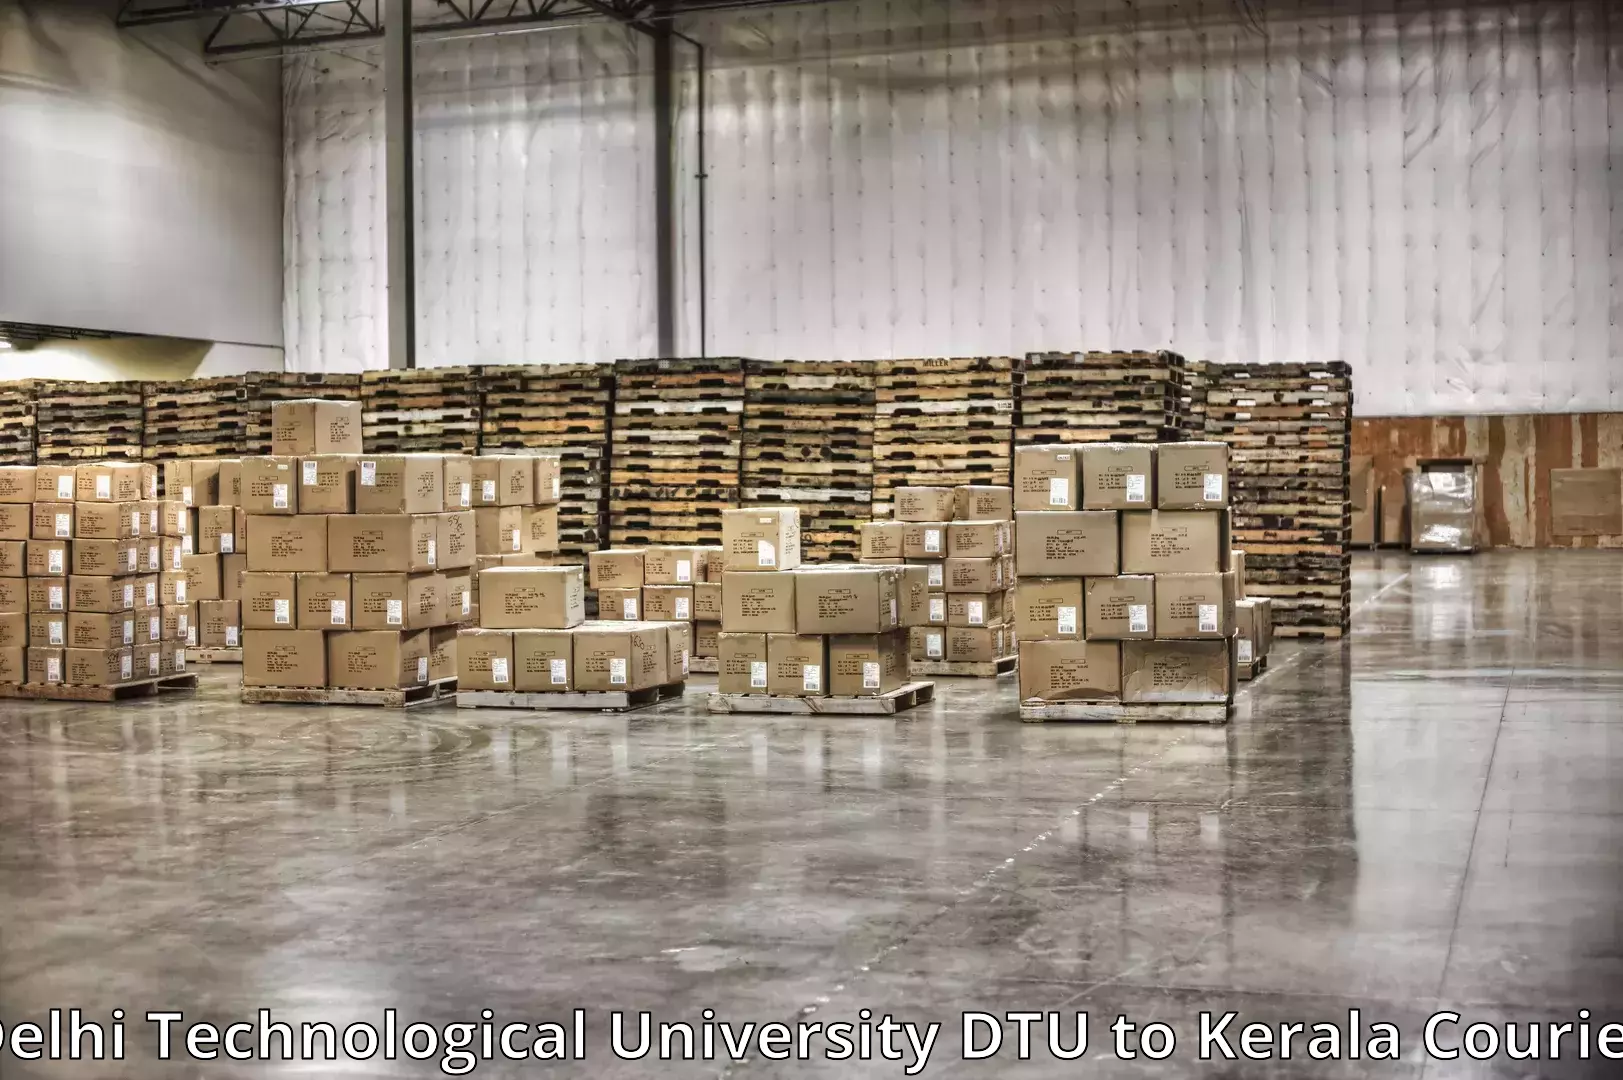 Moving and storage services in Delhi Technological University DTU to Palakkad